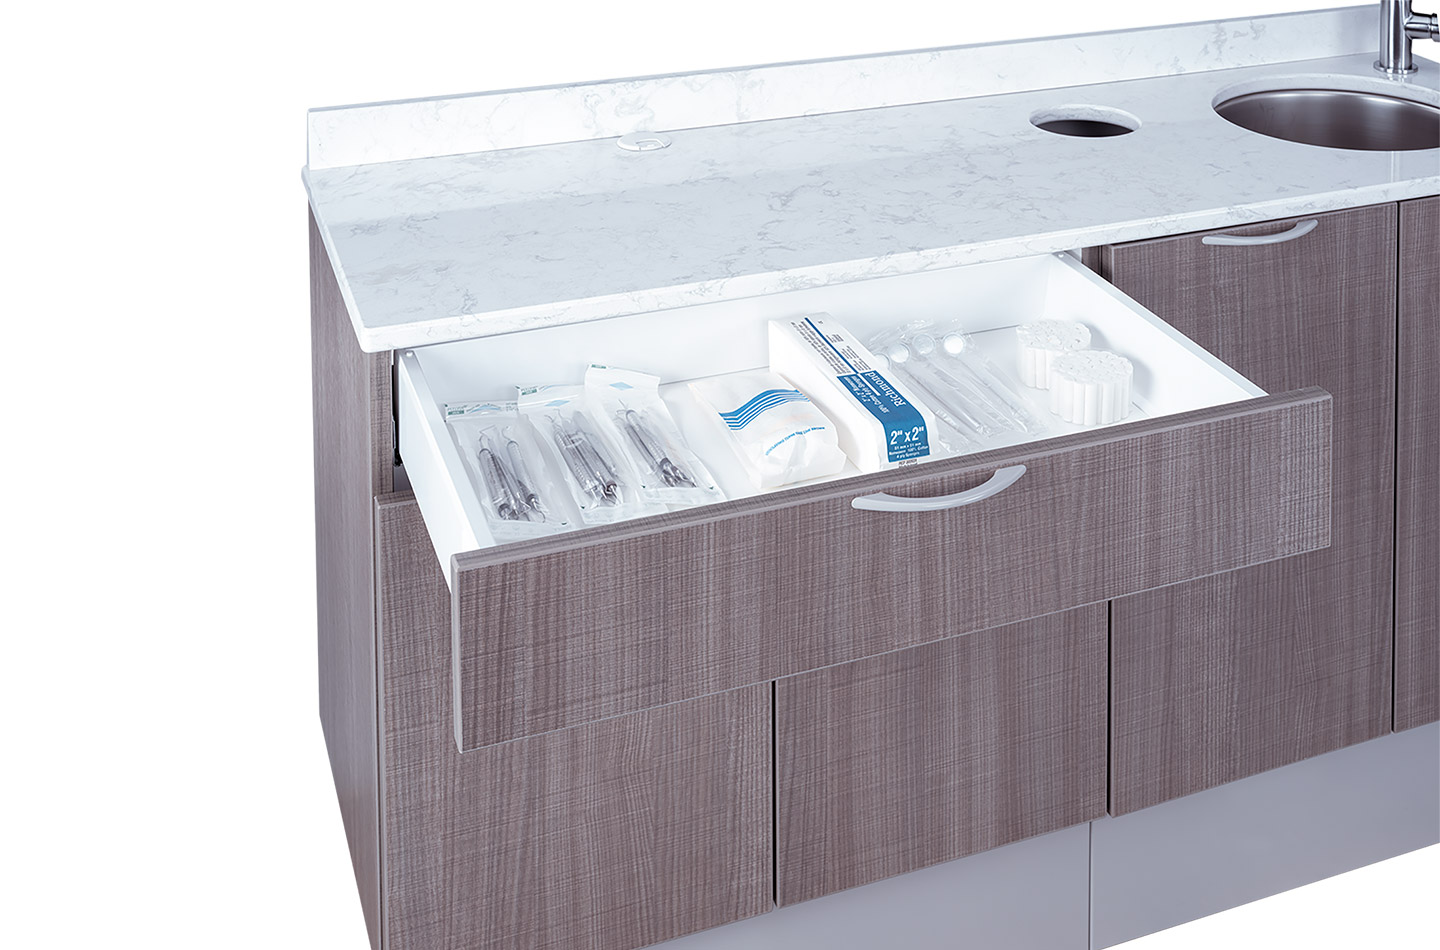 A-dec Inspire 393 side console with pull-out drawer